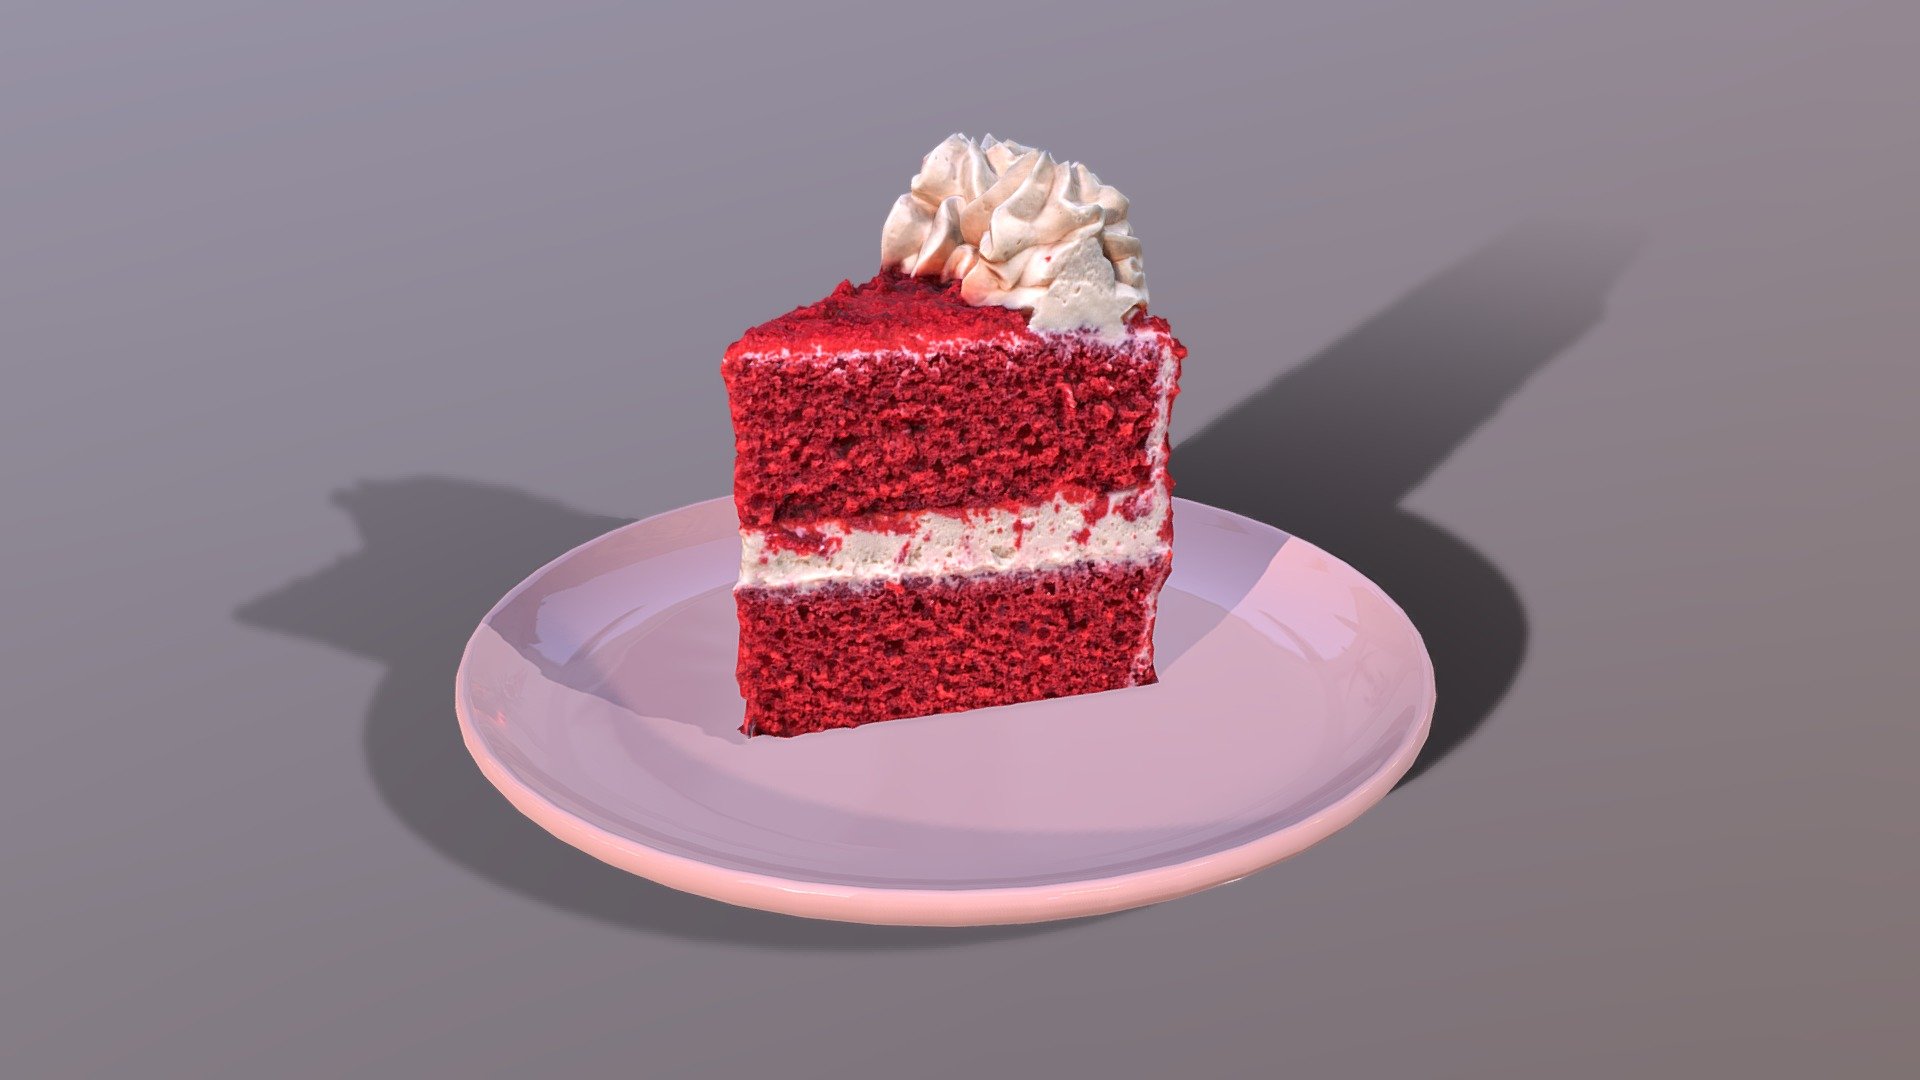 This premium Red Velvet Cake model was created using photogrammetry which is made by CAKESBURG Premium Cake Shop in the UK. You can purchase real cake from this link: https://cakesburg.co.uk/products/red-velvet-buttercream-cake?_pos=2&amp;_sid=a9ff9af21&amp;_ss=r

Textures 4096*4096px PBR photoscan-based materials Base Color, Normal, Roughness, Specular)Published by 3ds Max

Click here for the uncut version.

Click here for the cut &amp; slice version 3d model